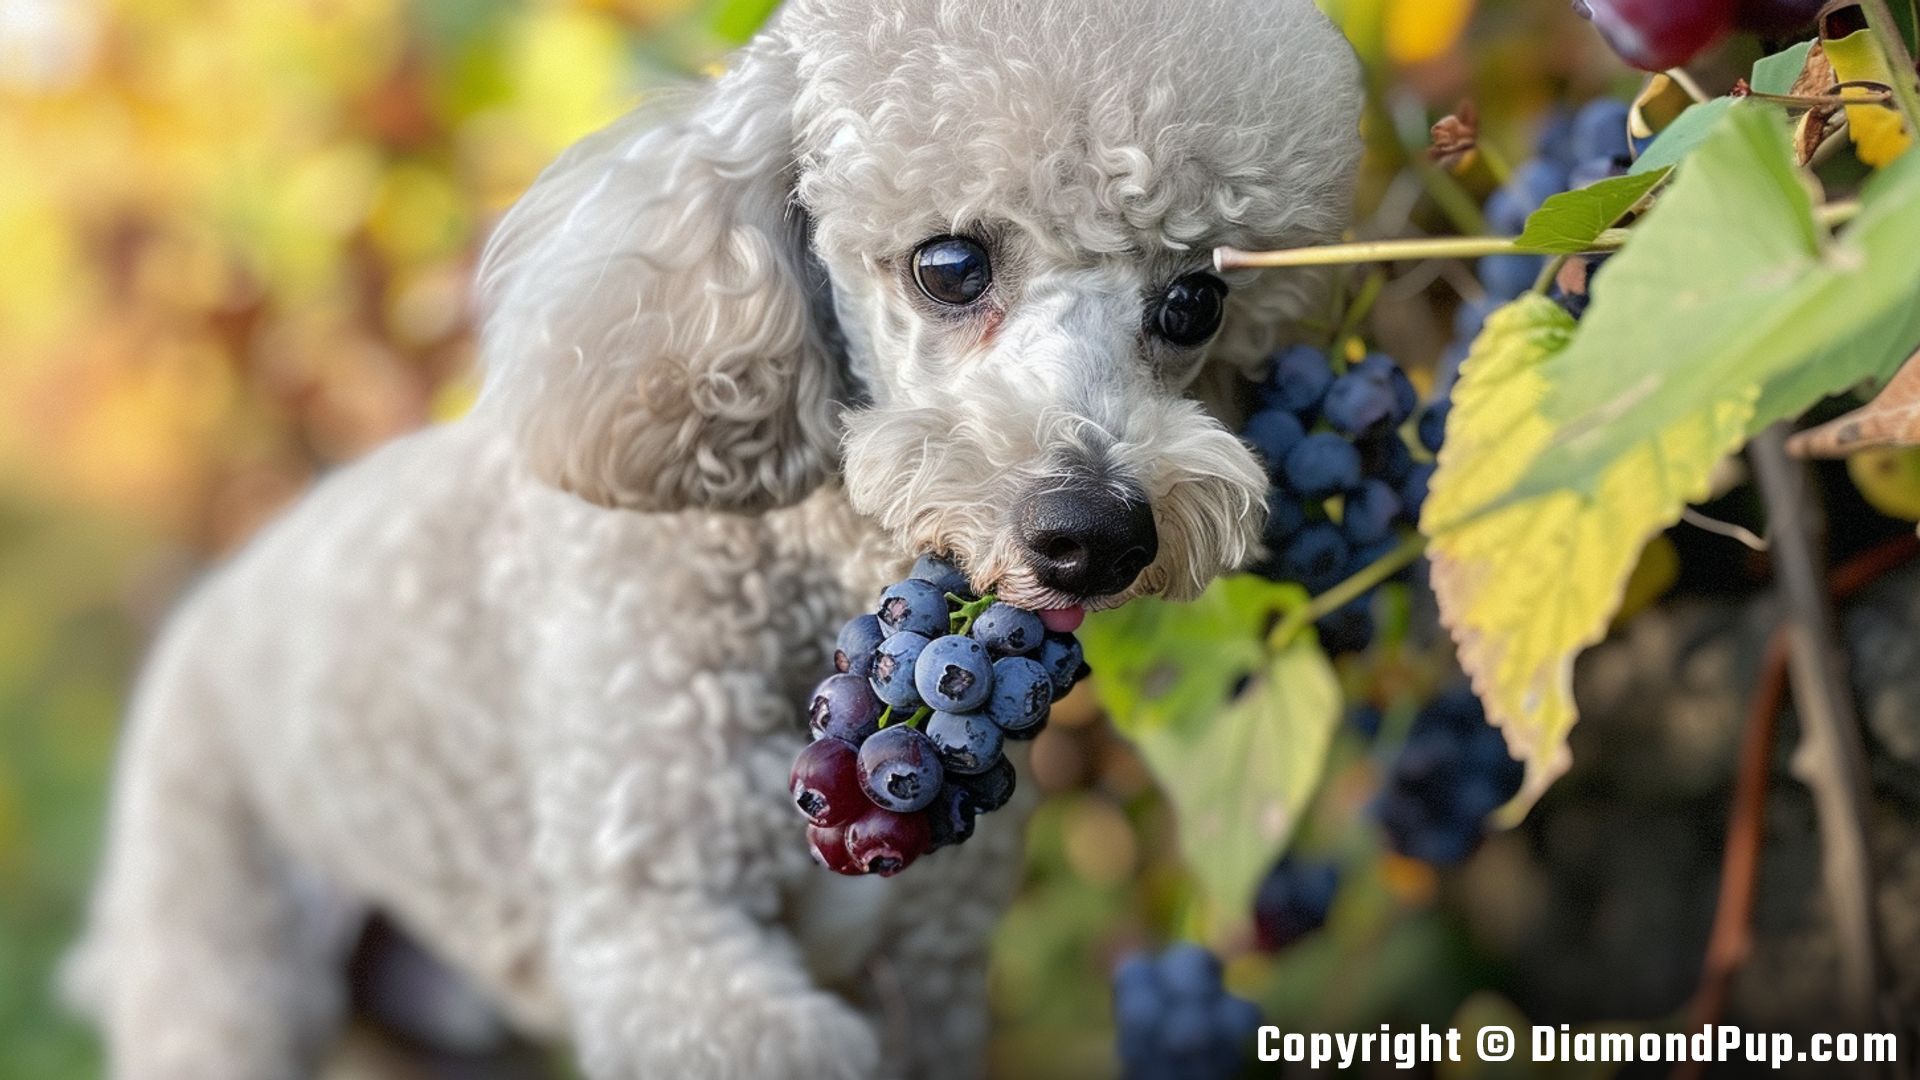 Photograph of an Adorable Poodle Eating Blueberries